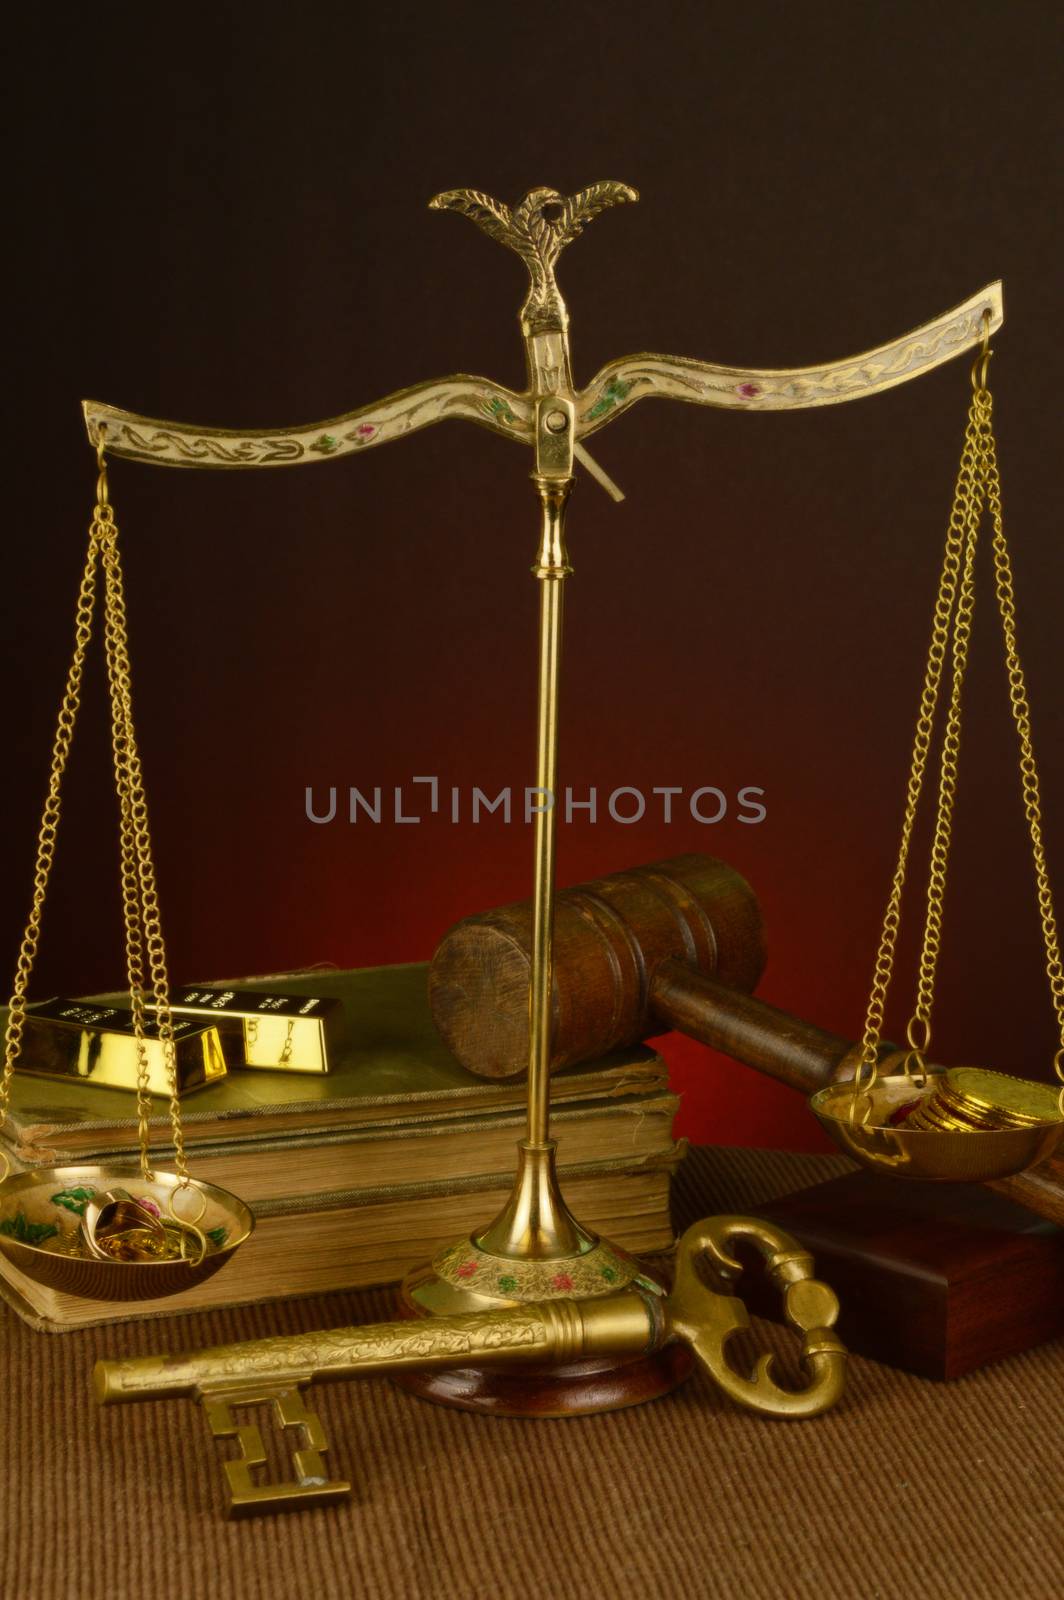 A vintage style image of an antique brass scale measuring gold as the point of focus.